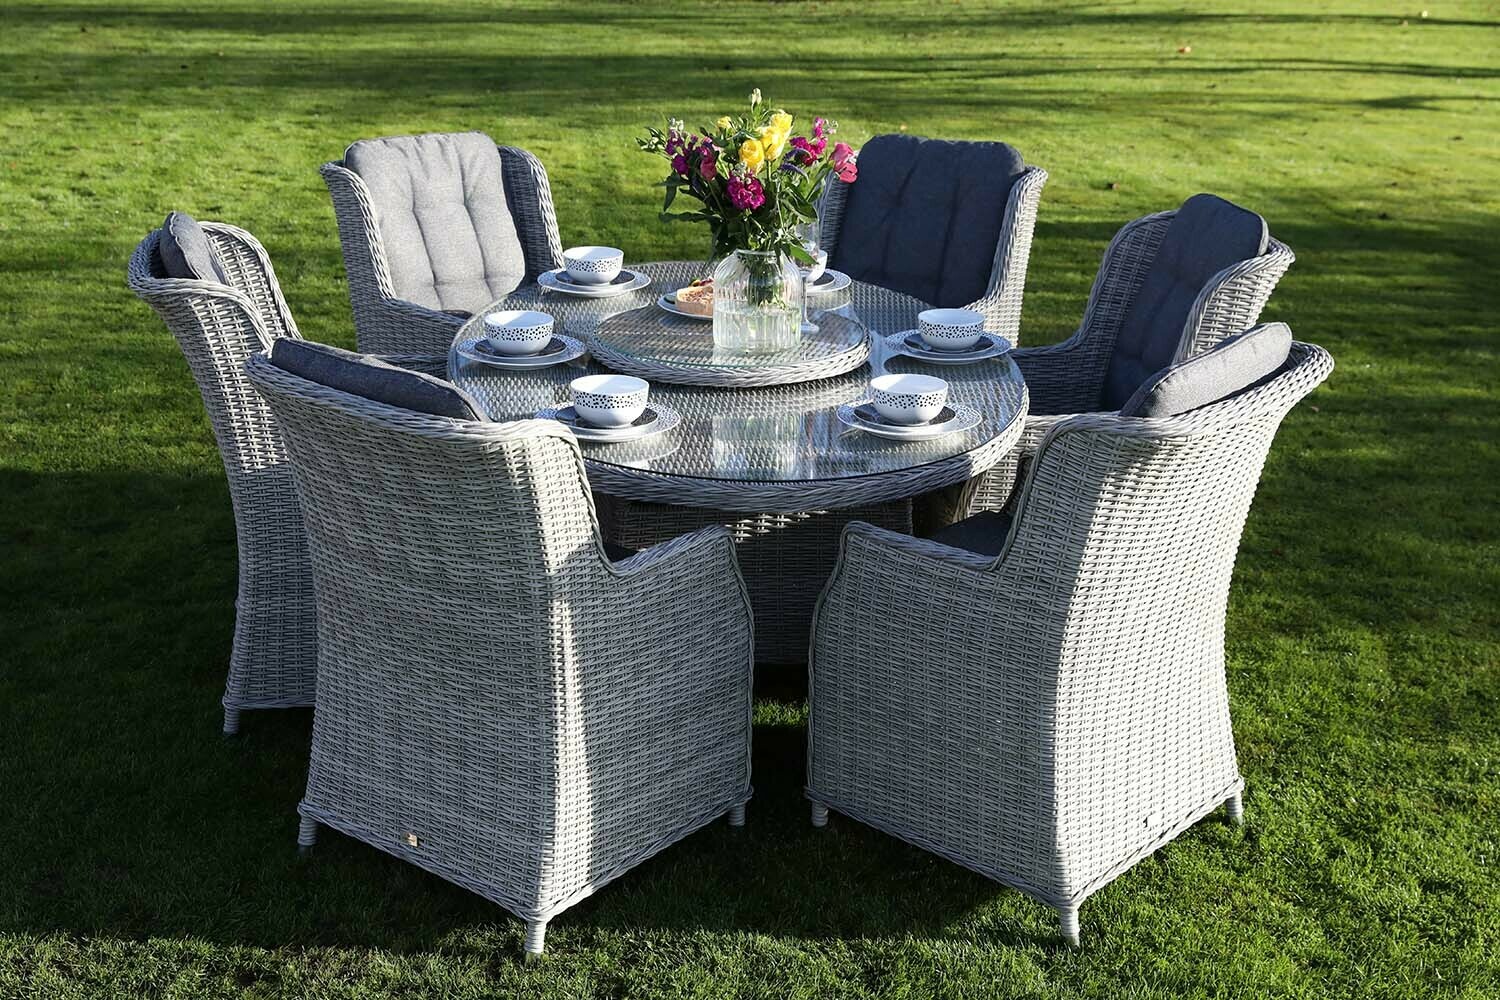 LAZIA OVAL SIX SEAT DINING SET WAS £2145 NOW £1995